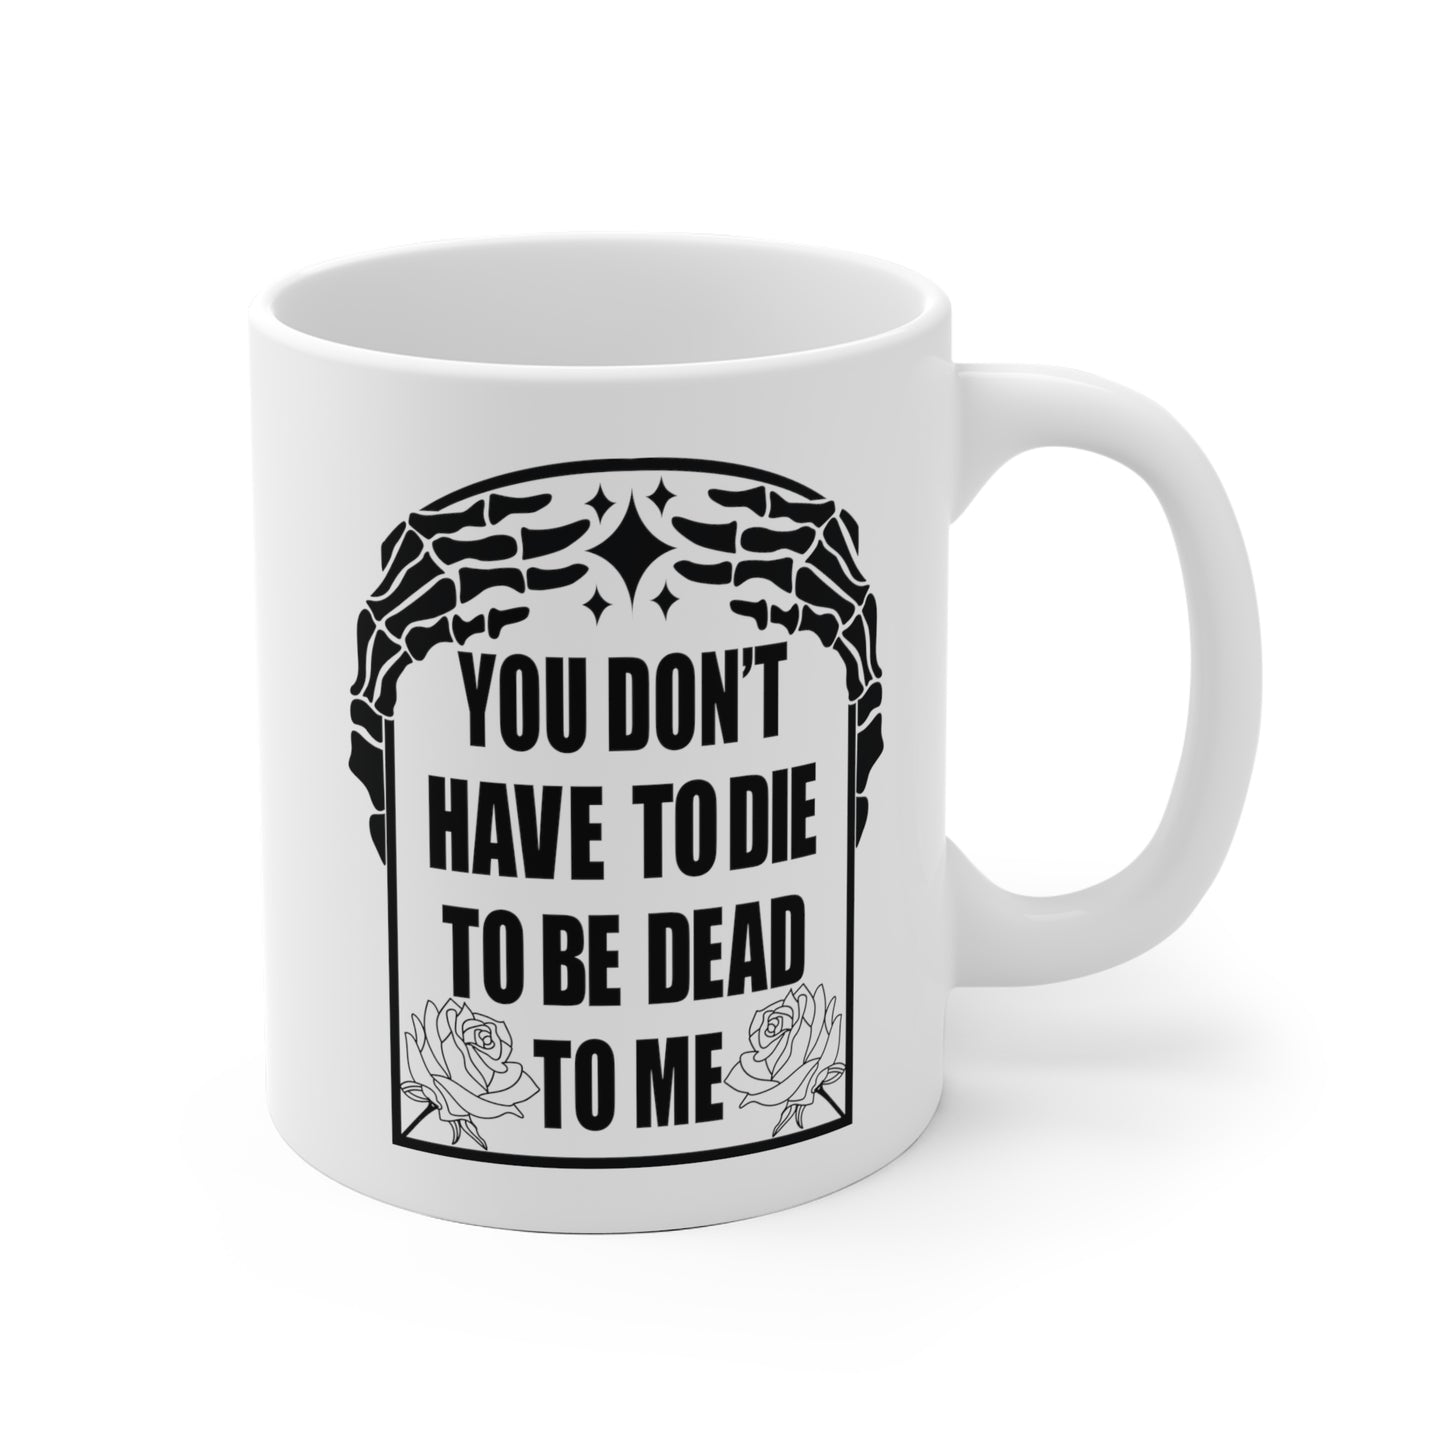 You Don't Have To Die To Be Dead To Me Mug, Halloween, Anti-Social, Break Up Mug